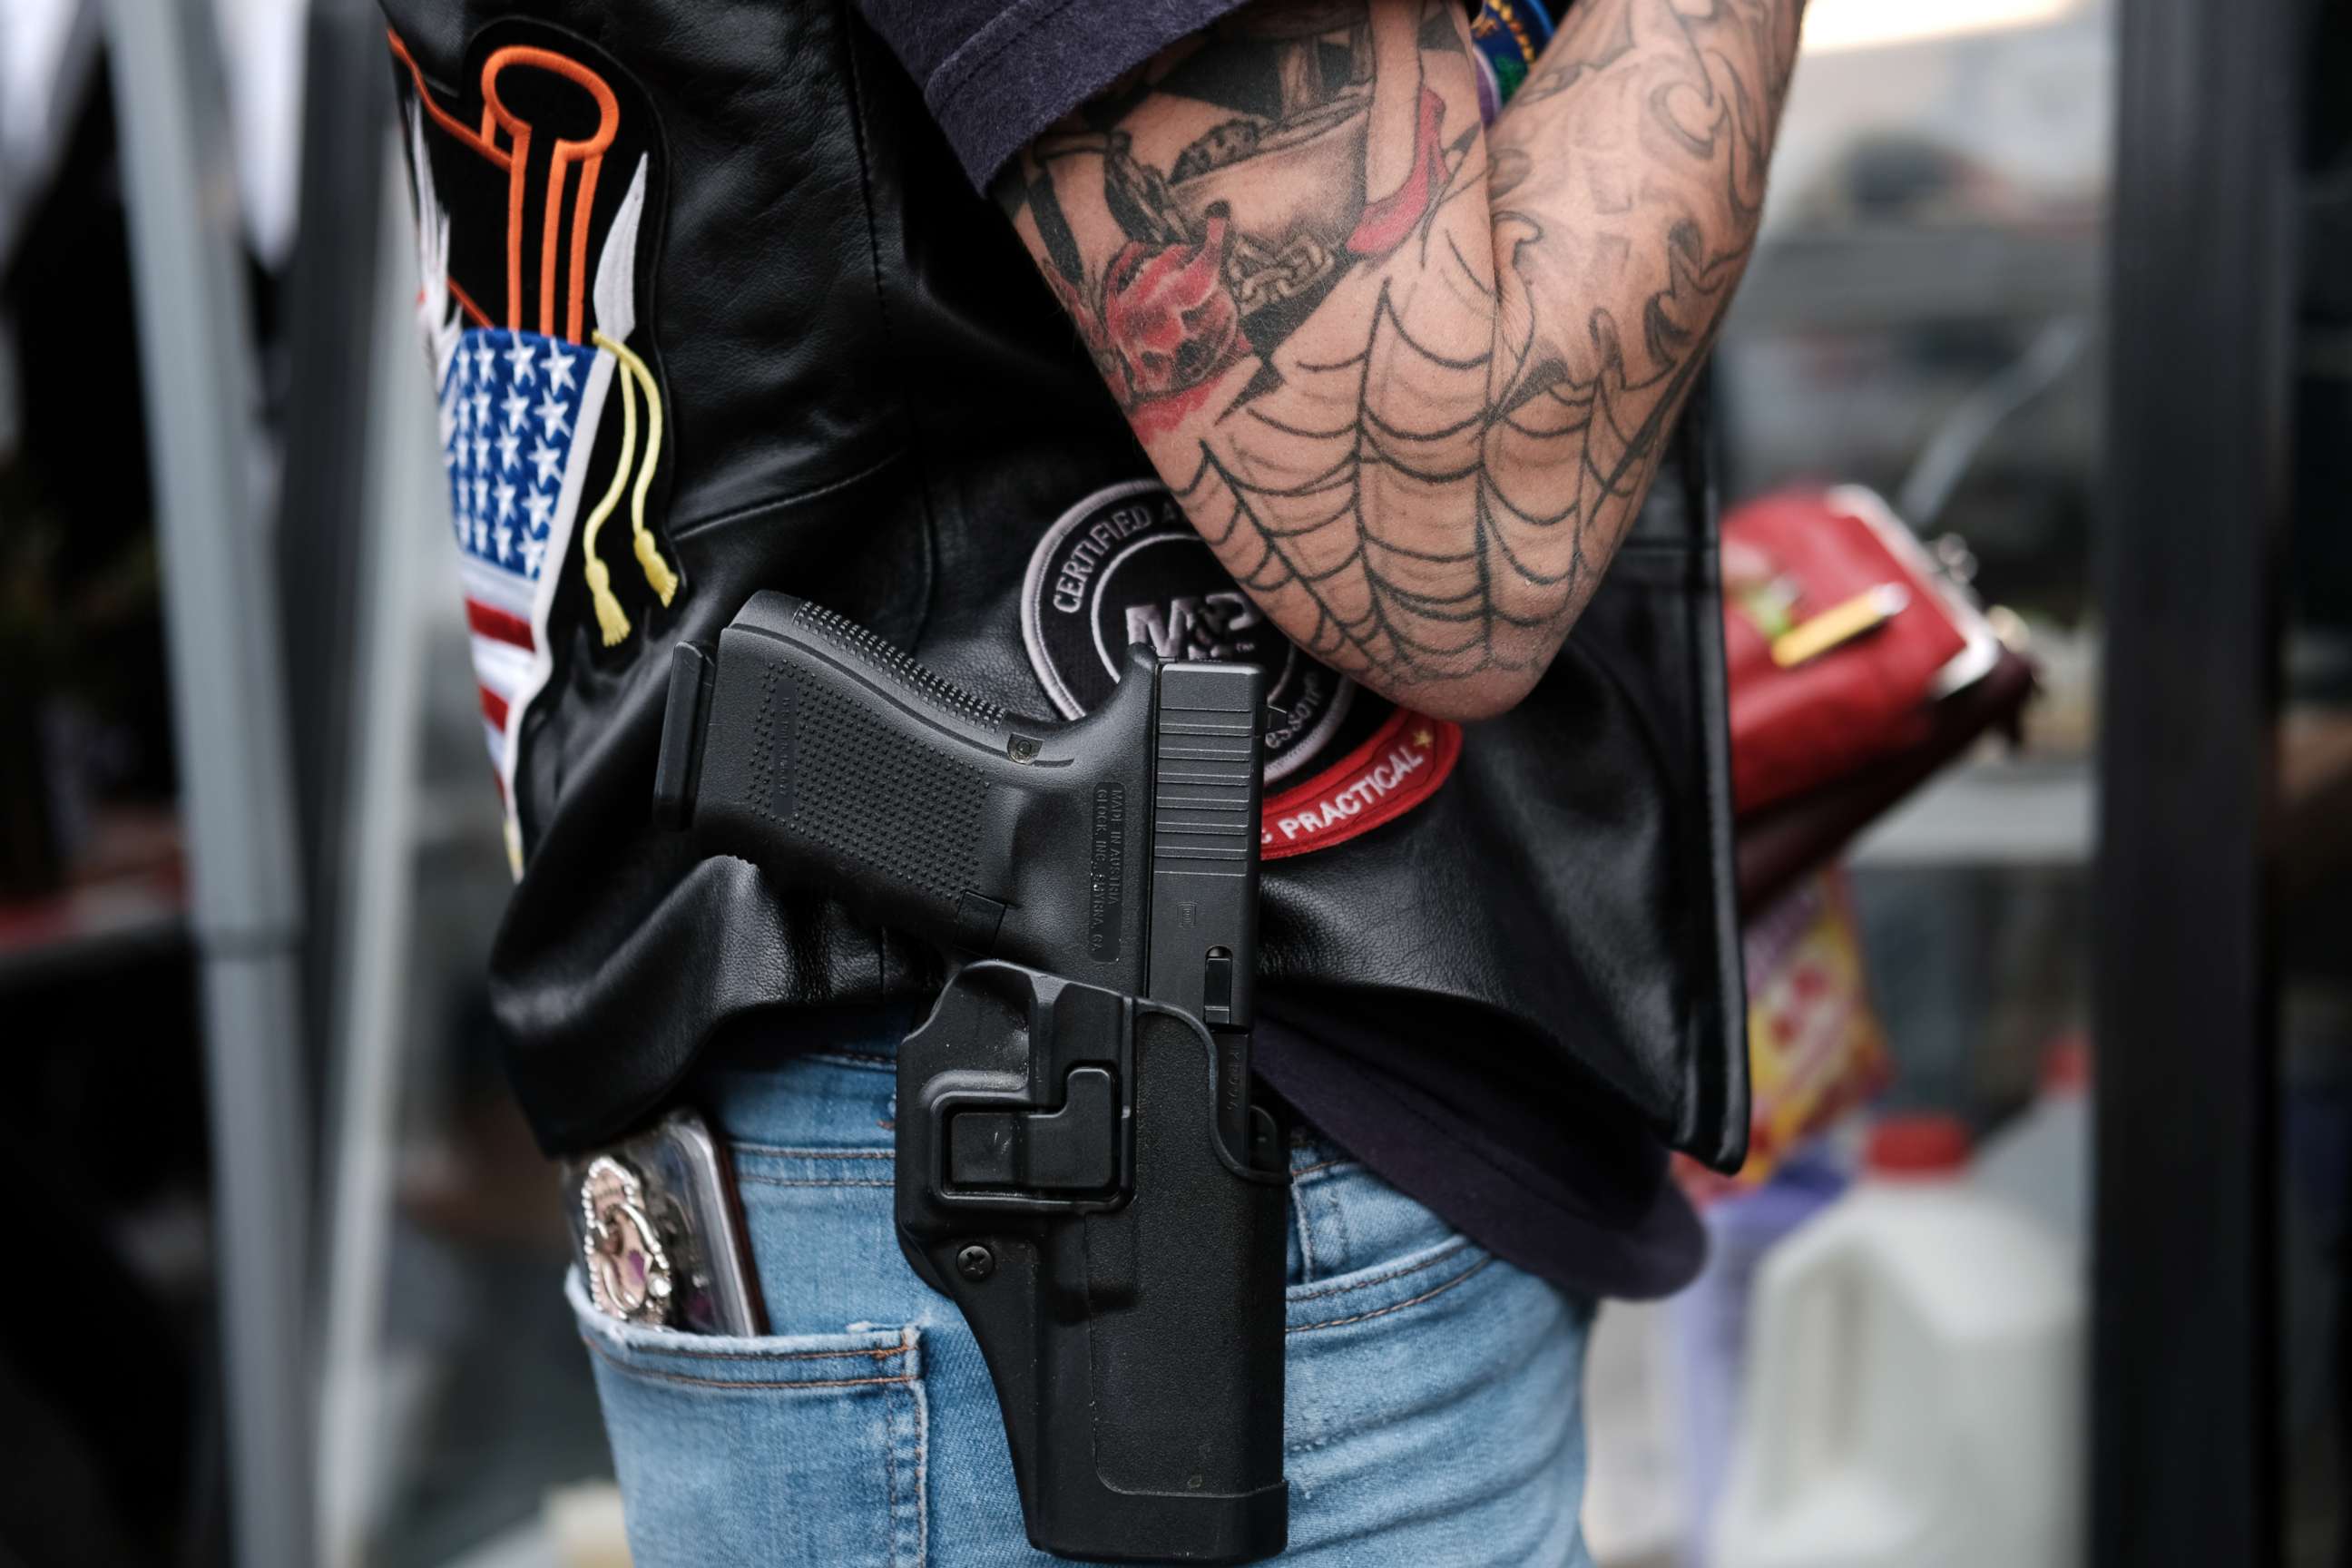 PHOTO: A member of the public carries a pistol during a second amendment rally on Oct. 12, 2019, in Greeley, Pa.